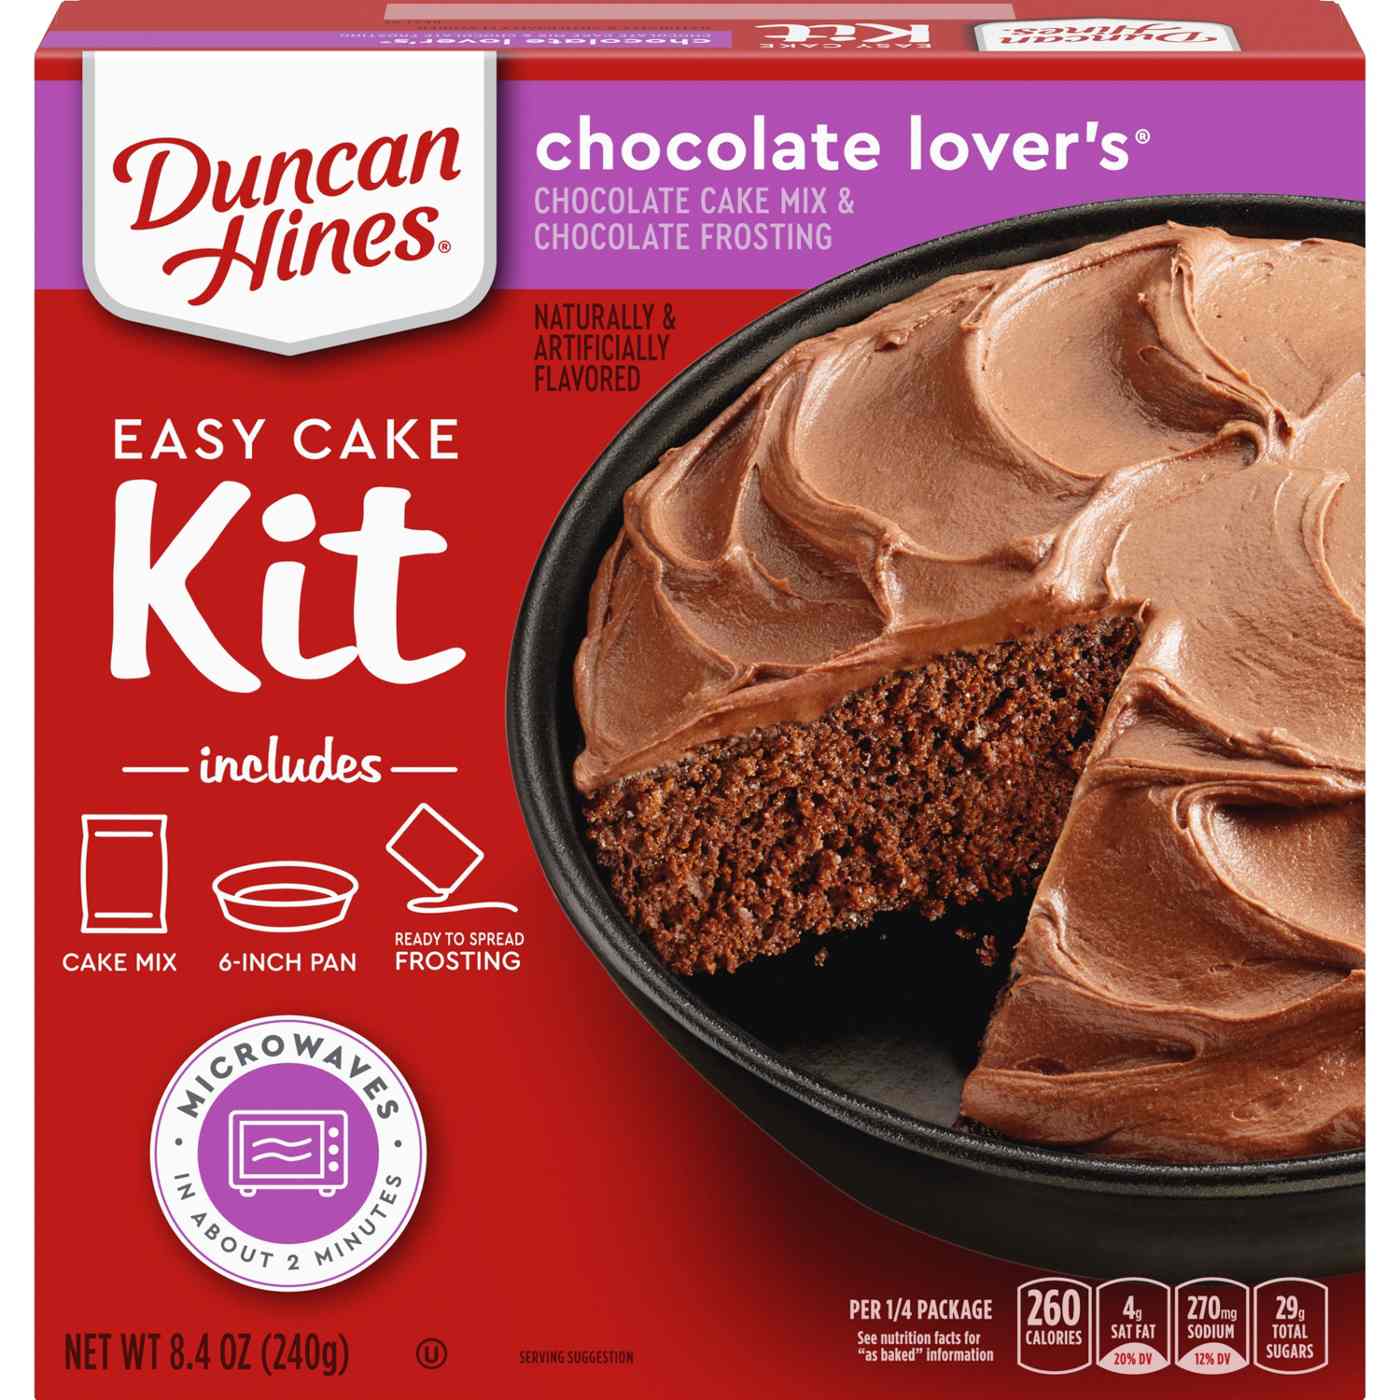 Duncan Hines Easy Cake Kit Chocolate Lover's Cake Mix; image 1 of 7